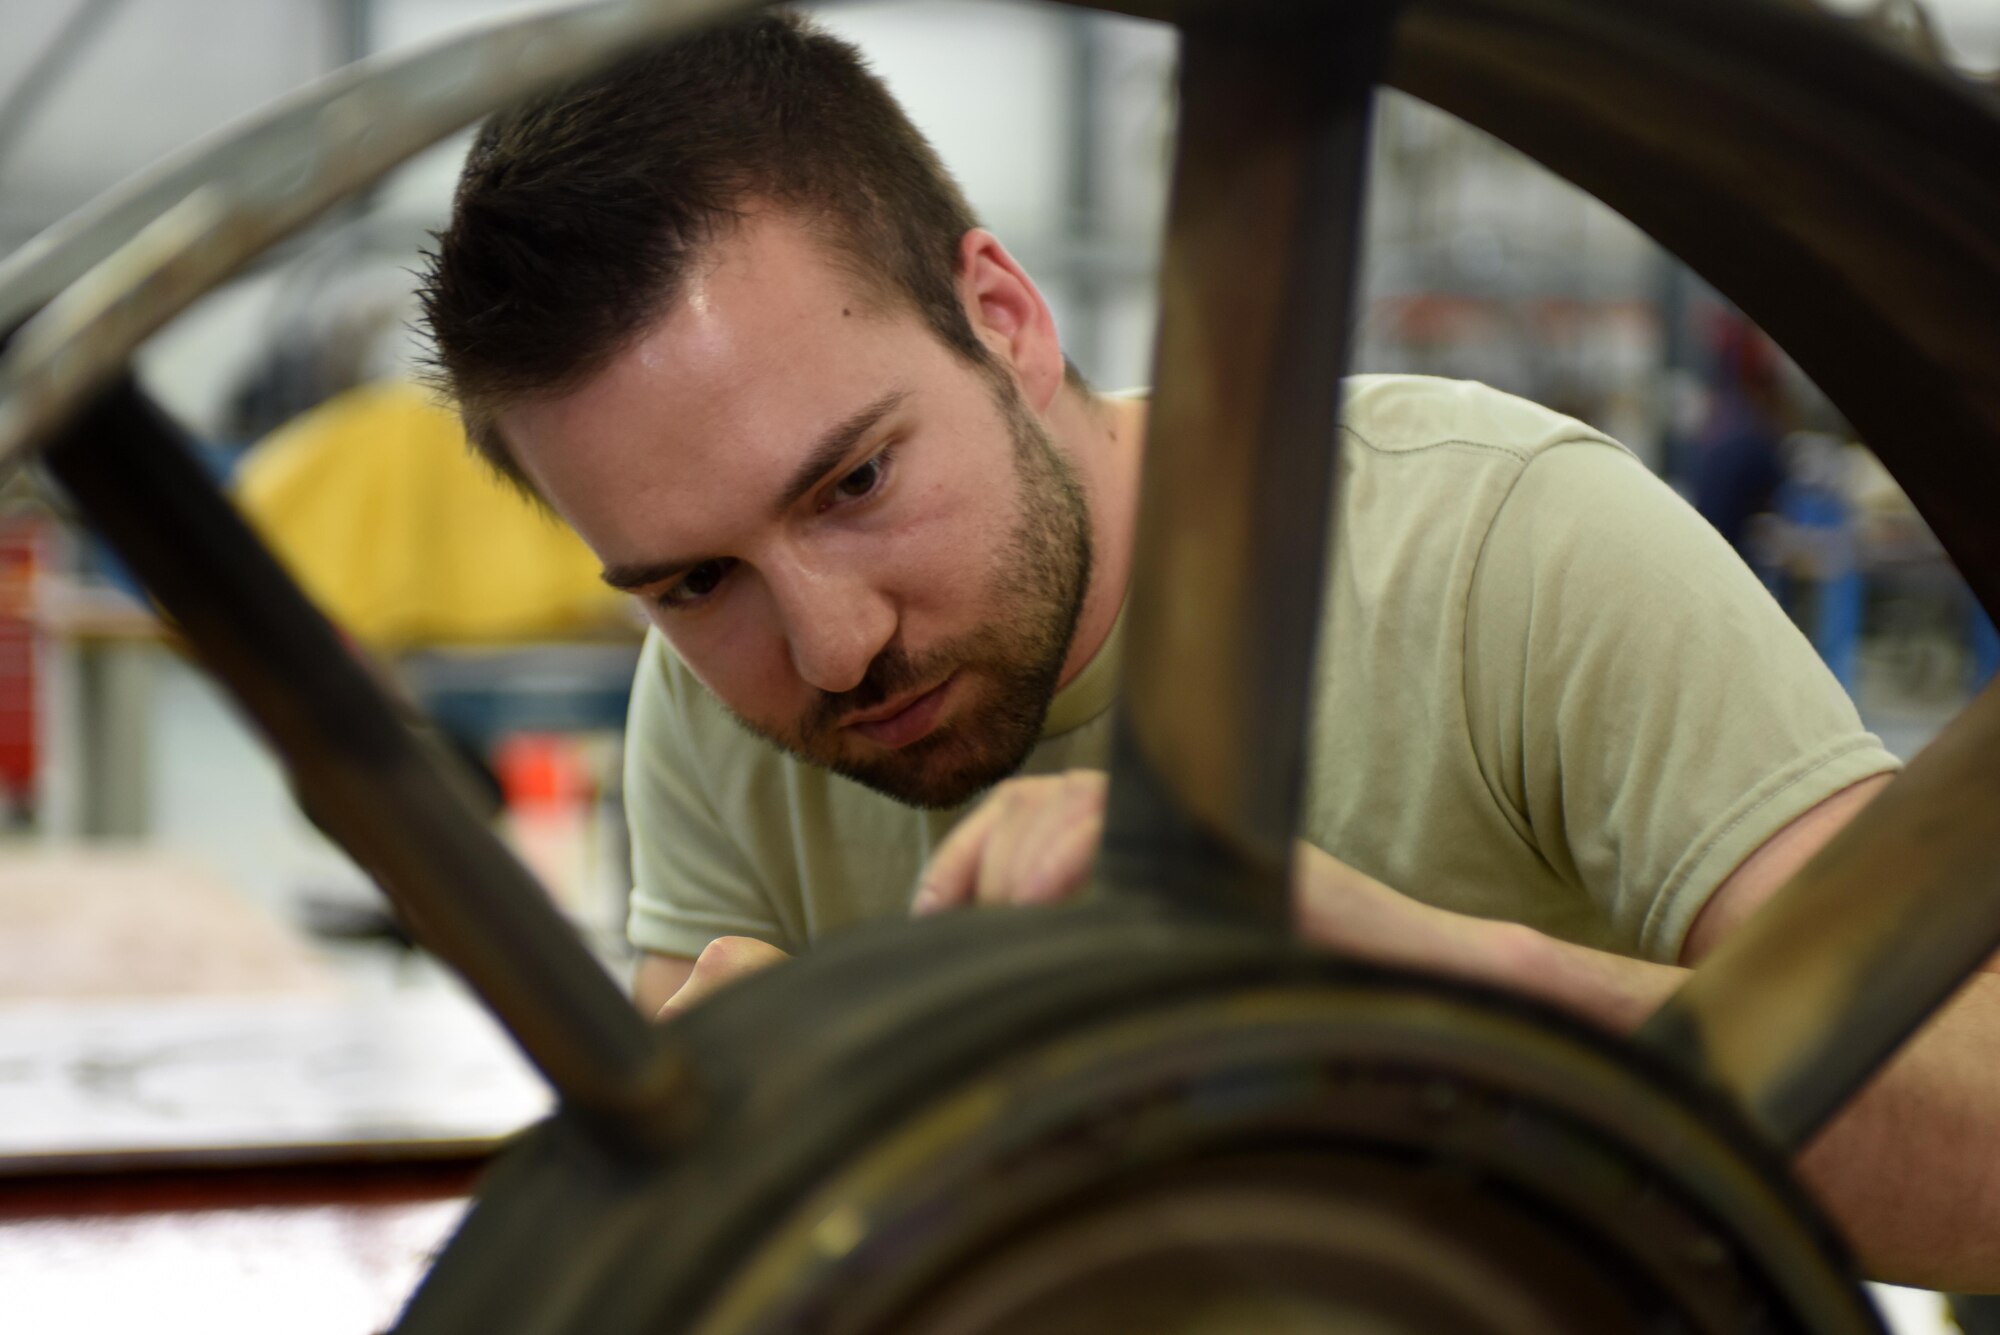 An Airman assigned to the 48th Component Maintenance Squadron inspects a turbine exhaust case at Royal Air Force Lakenheath, England, June 13. Part of the 48th CMS’s responsibilities include the routine maintenance of F-15 engines. (U.S. Air Force photo/Airman 1st Class Eli Chevalier)